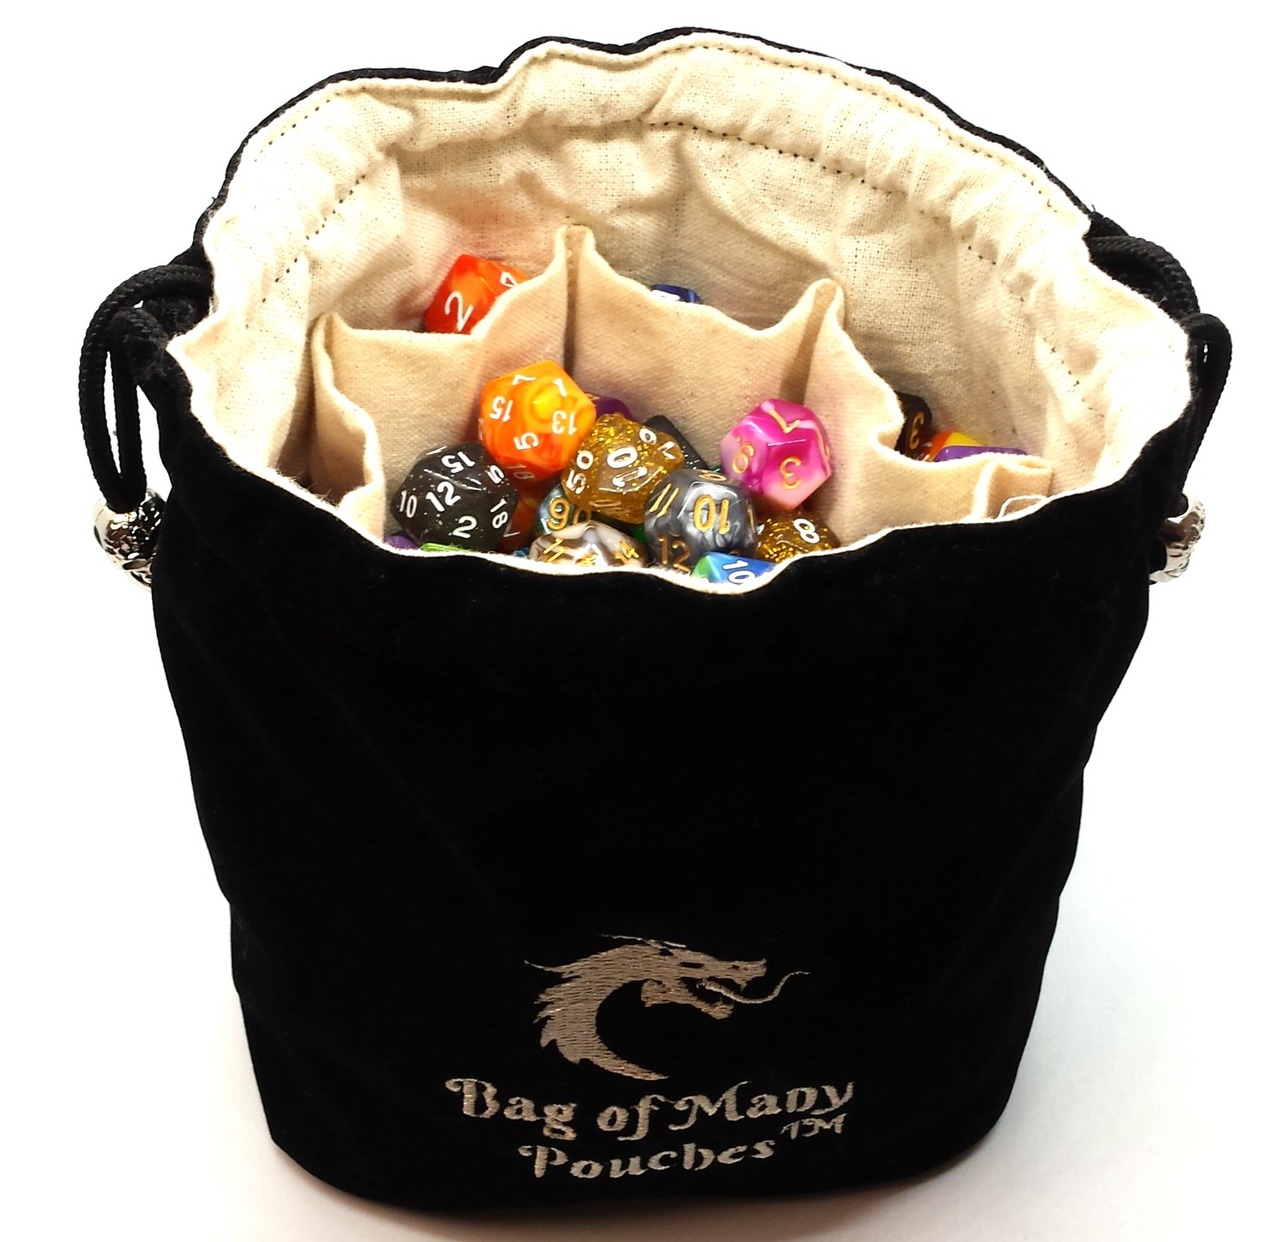 Bag of Many Pouches RPG Dnd Dice Bag Black